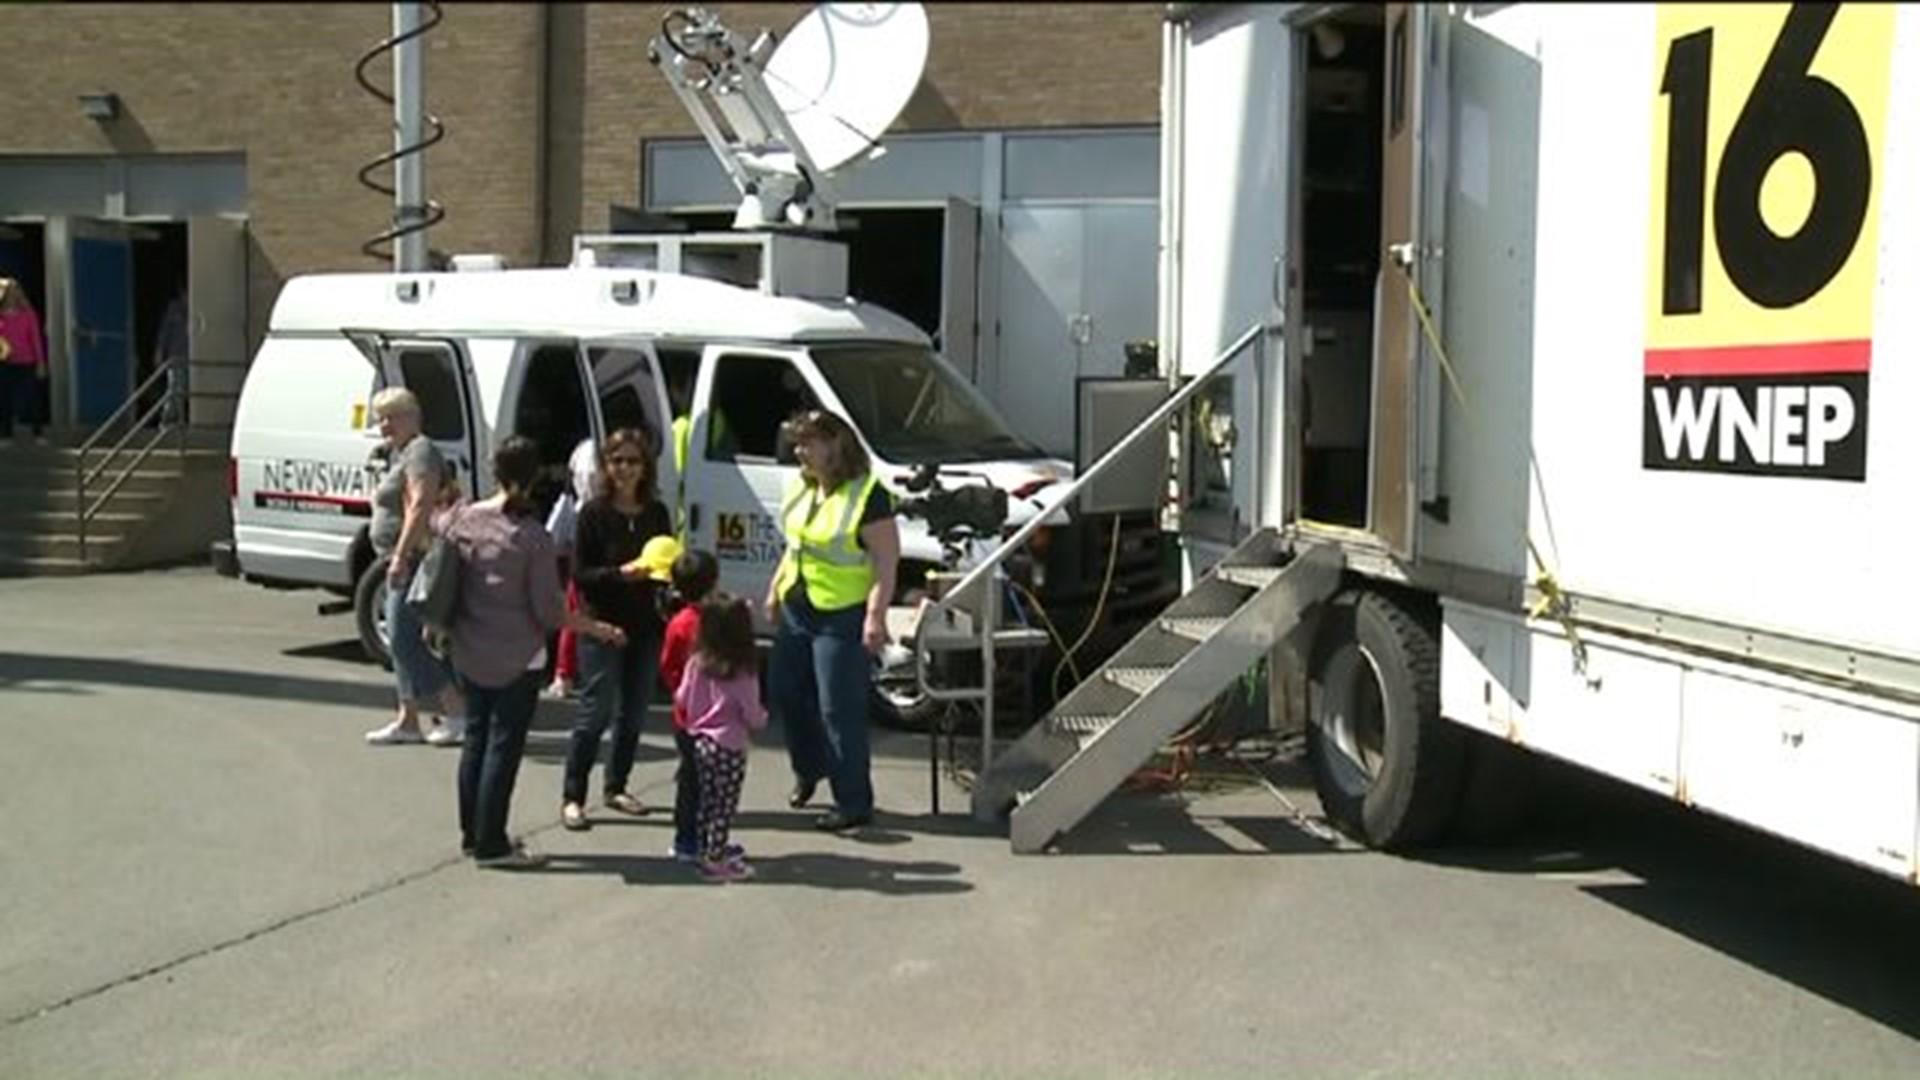 Dozens of Kids Showed up for Touch a Truck Event